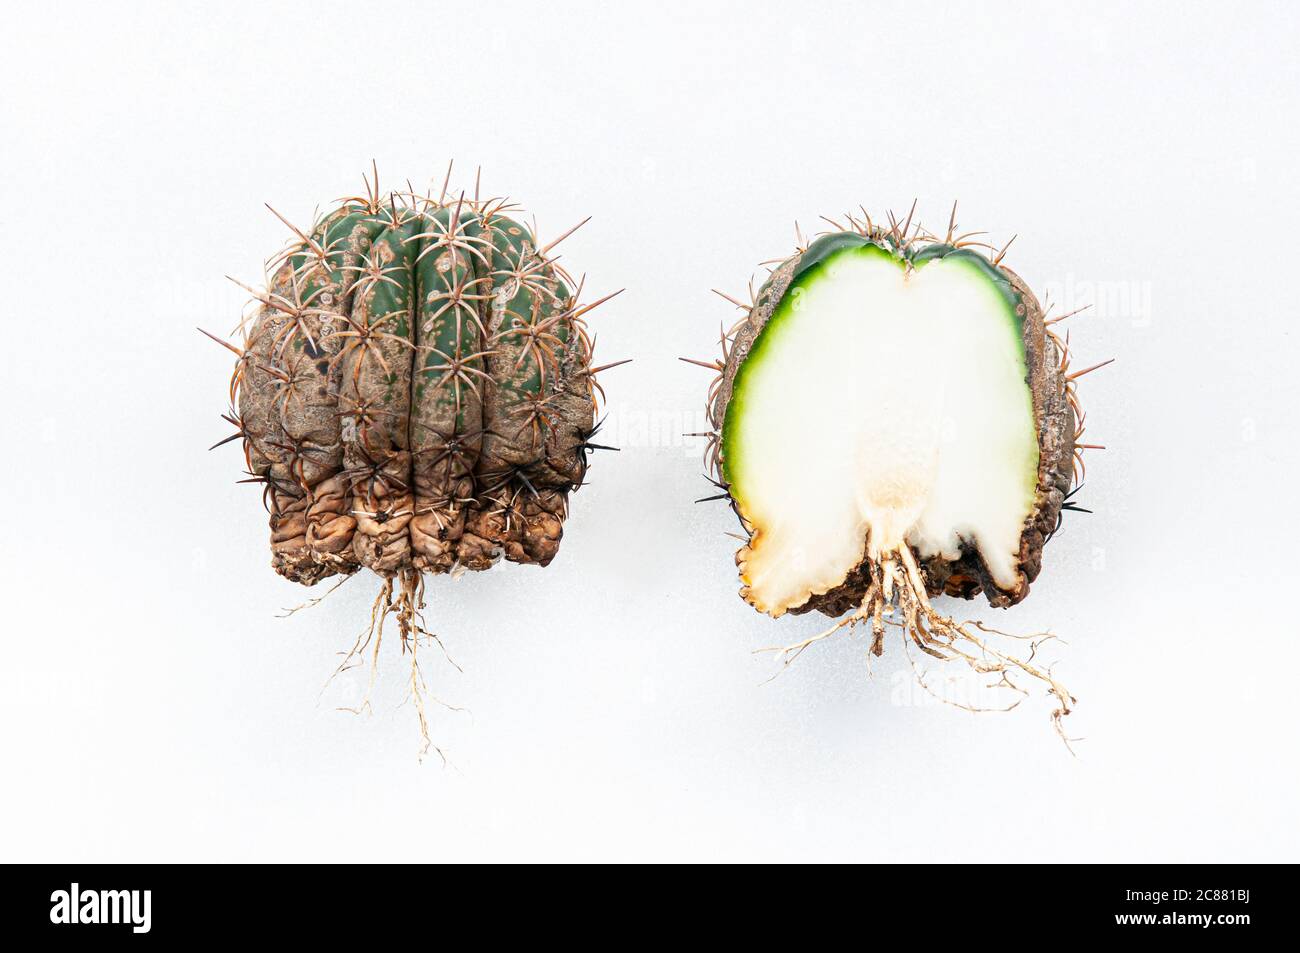 Cactus disease dry root rot caused by fungi, half cut fungi infected Melocactus isolated on white background showing serious damage on skin Stock Photo